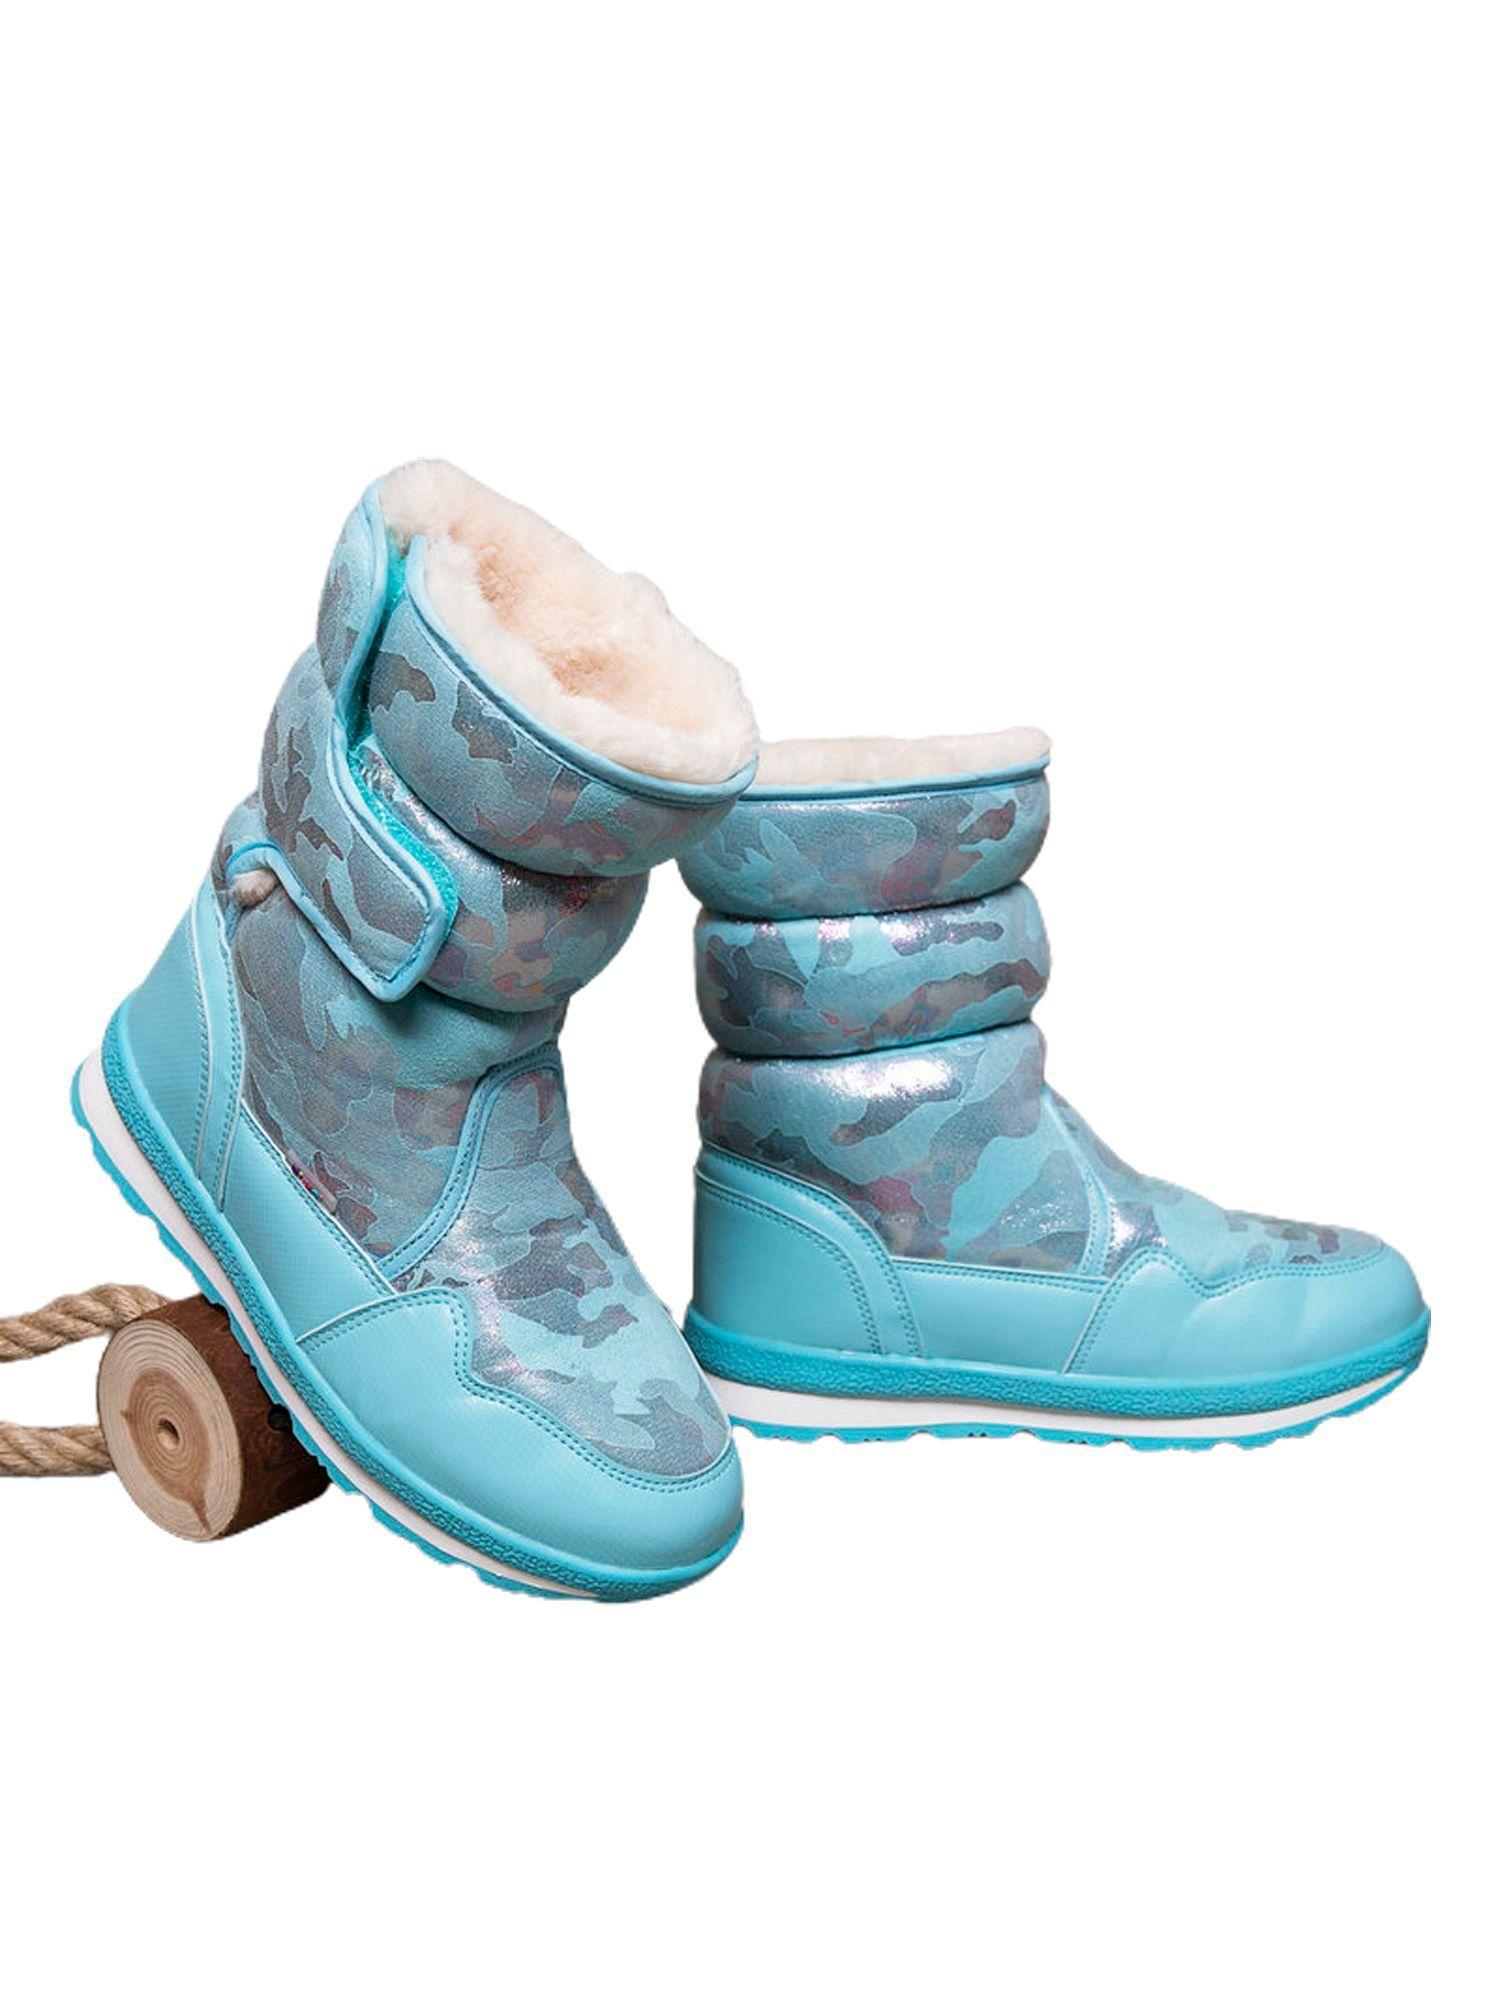 blue and silver glam girls winter snow boots